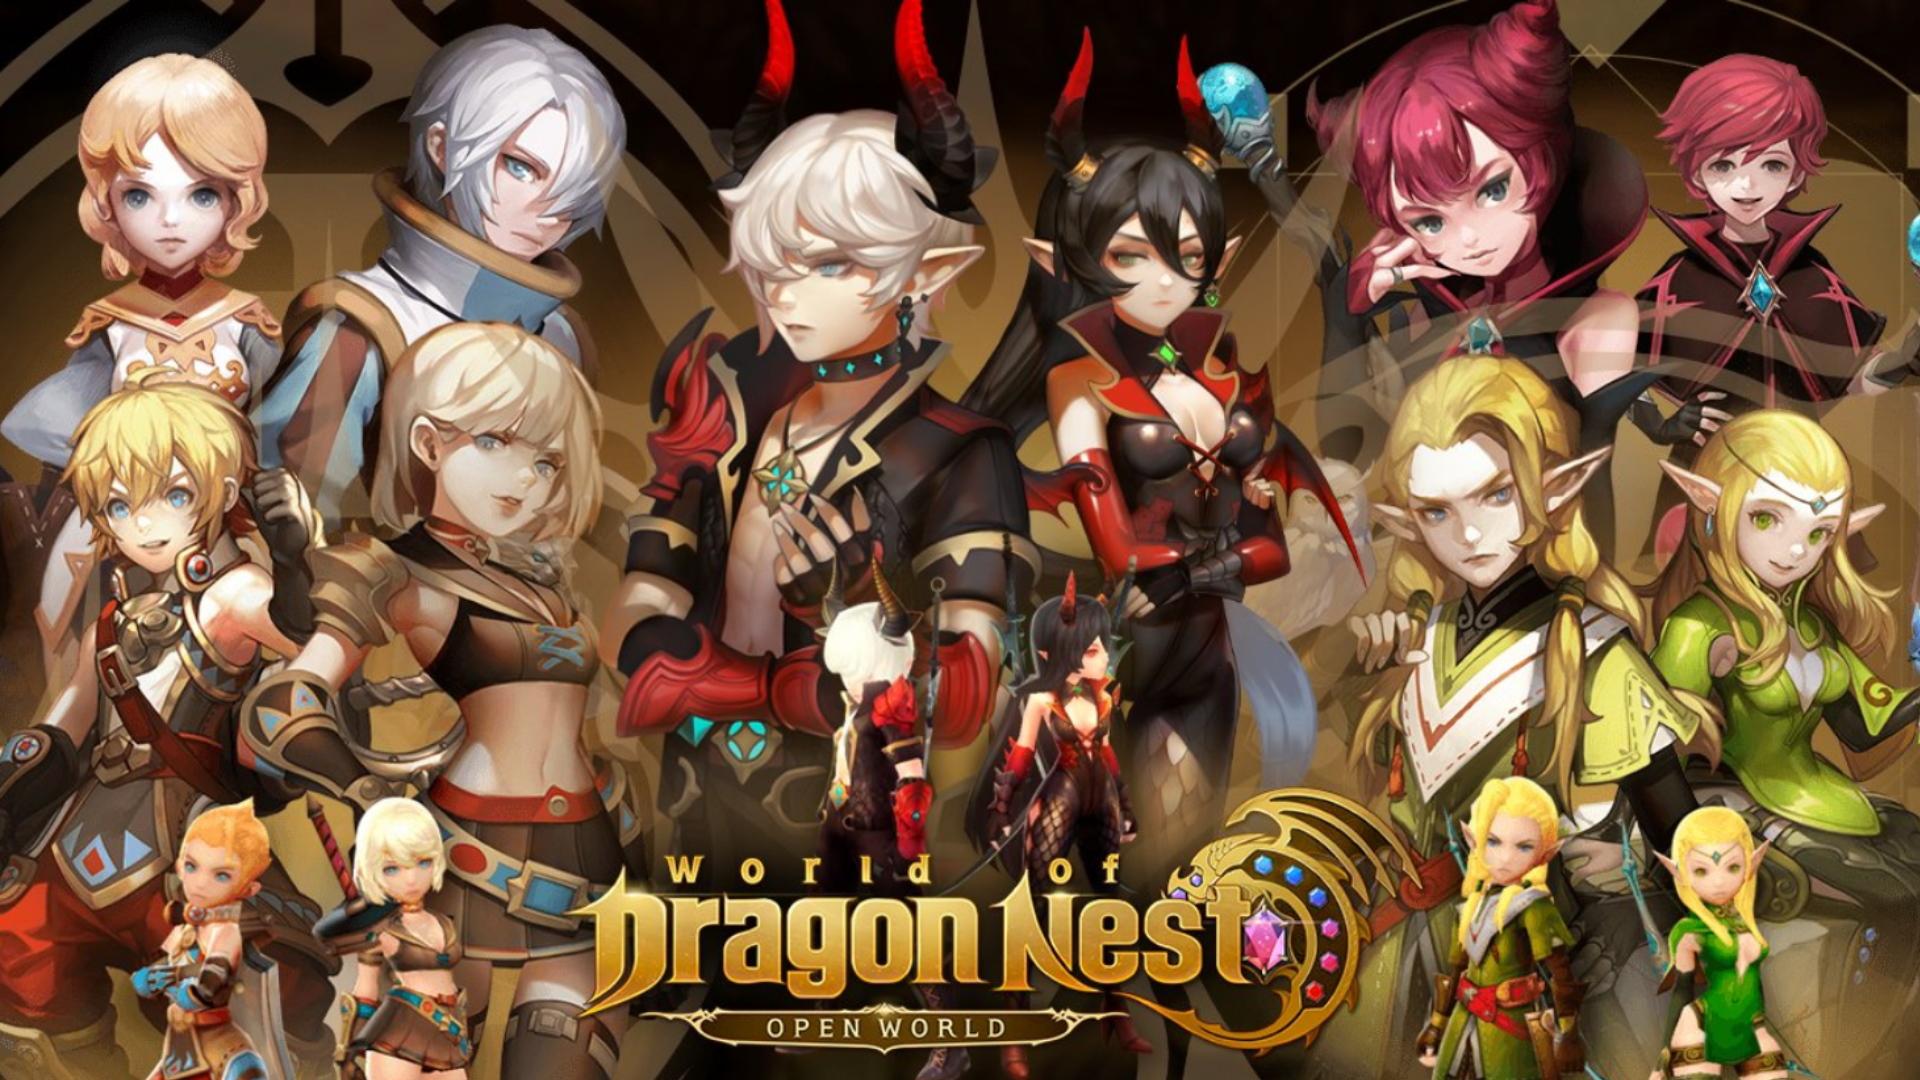 Fight in the Ultimate Dragon Nest Game Arena